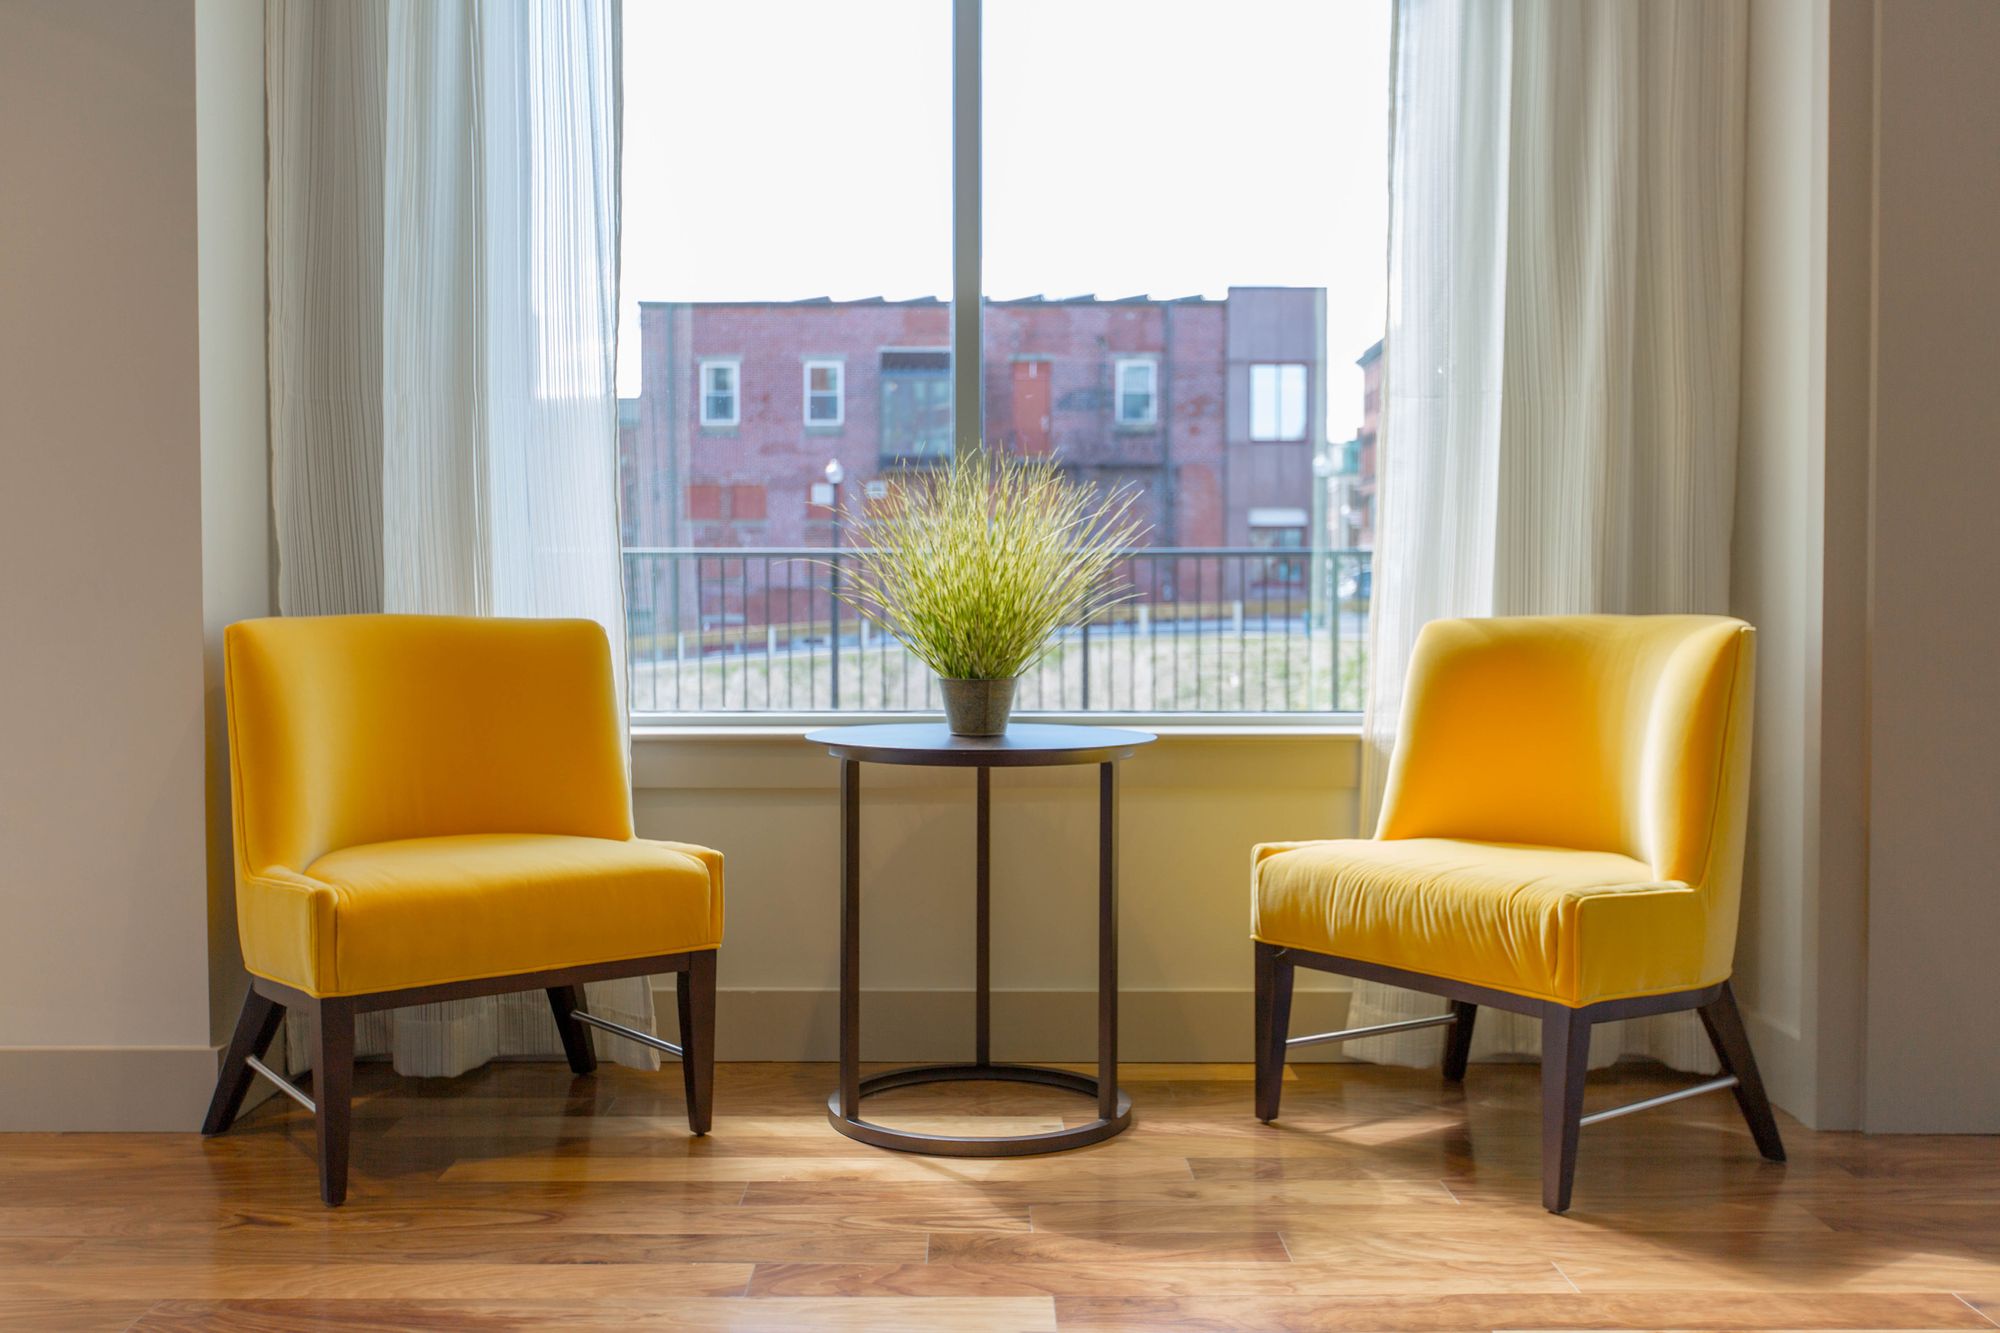 Stock photo of two yellow chairs.